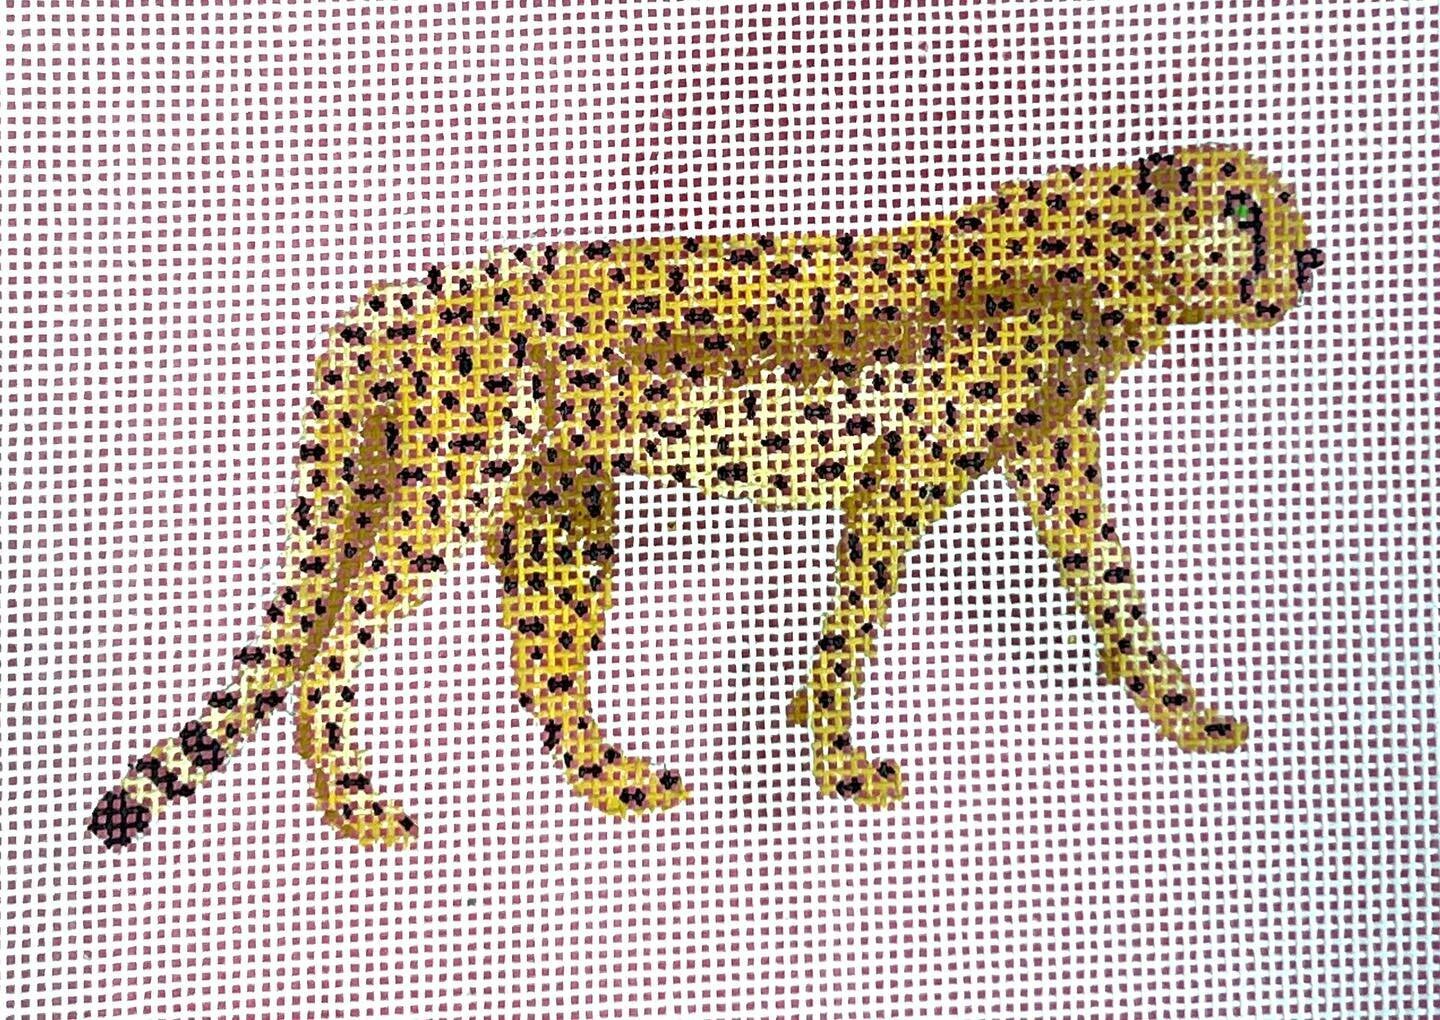 jagluiperd. Cheetah. The swiftest big cat on earth. Cheetah comes from a Hindi word, Chita, meaning &ldquo;spotted one&rdquo;. 

Cheetahs are a favorite of my girls and they are the best mothers. Cheetahs meow they don&rsquo;t roar. This beautiful an